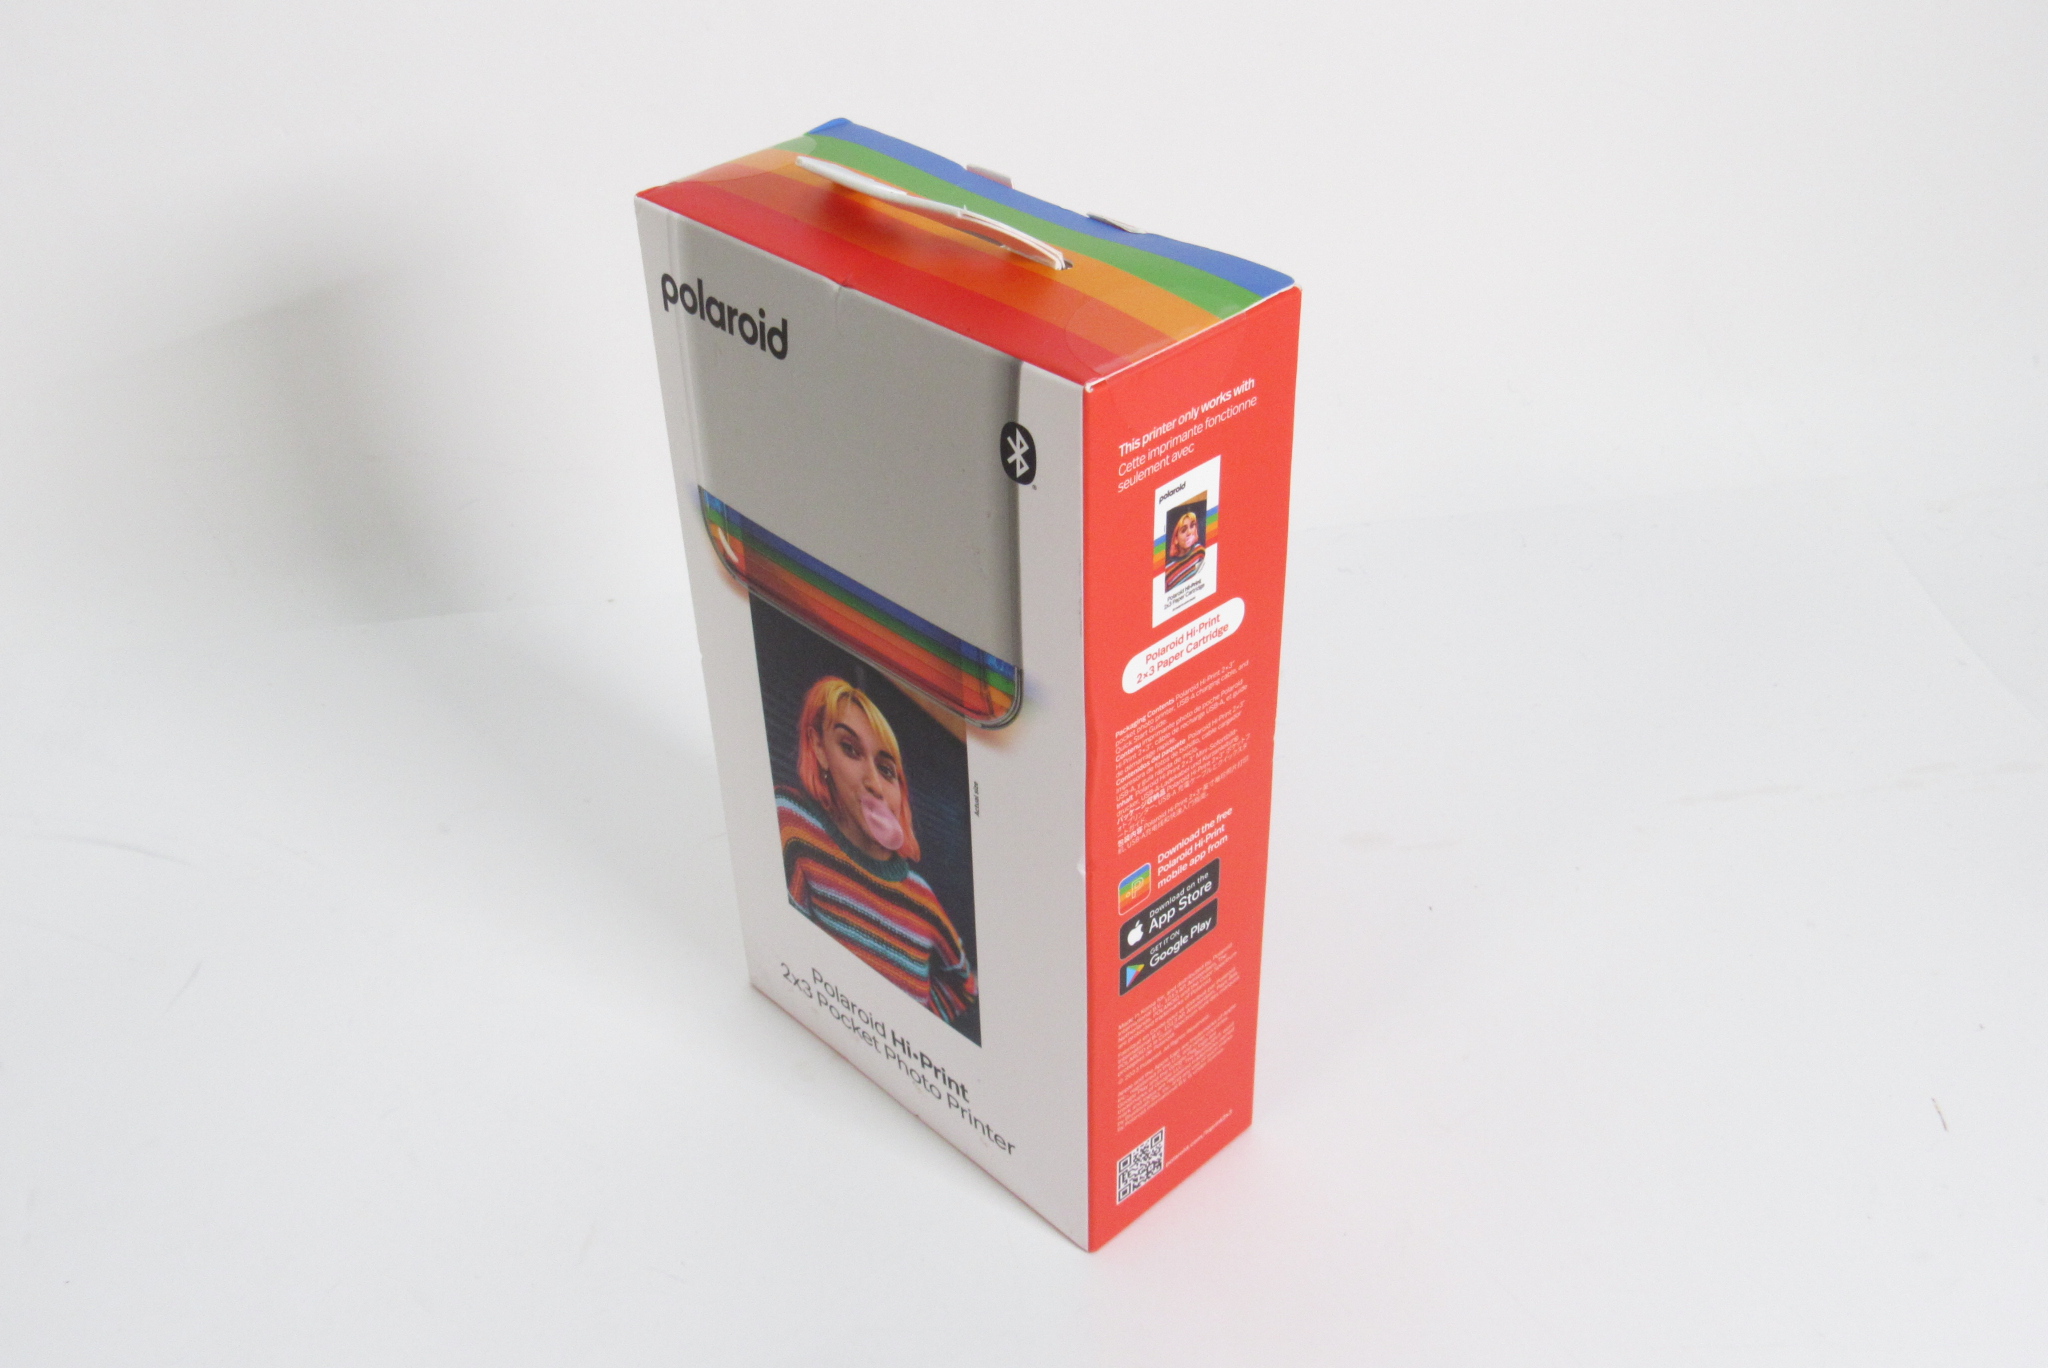 How to Install Paper Cartridge for your Polaroid Hi-Print 